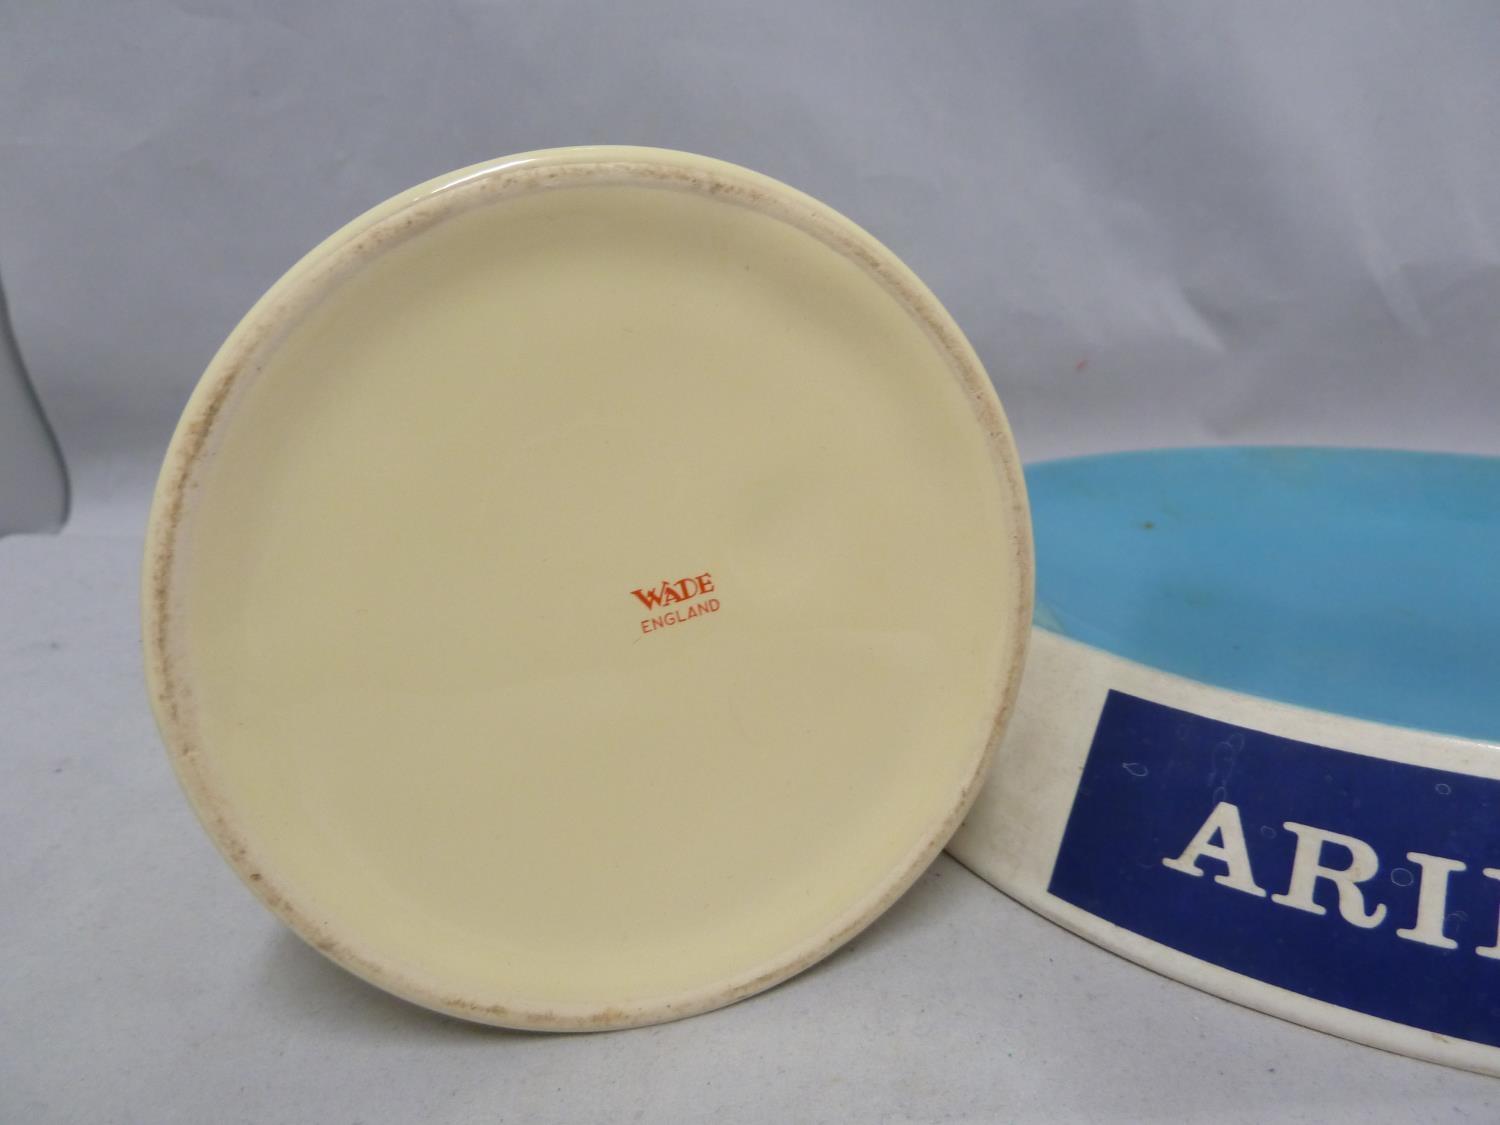 Tobacco Industry Interest, Wade Regency Ware - a large public house ashtray for Ariel Filter - Image 3 of 6